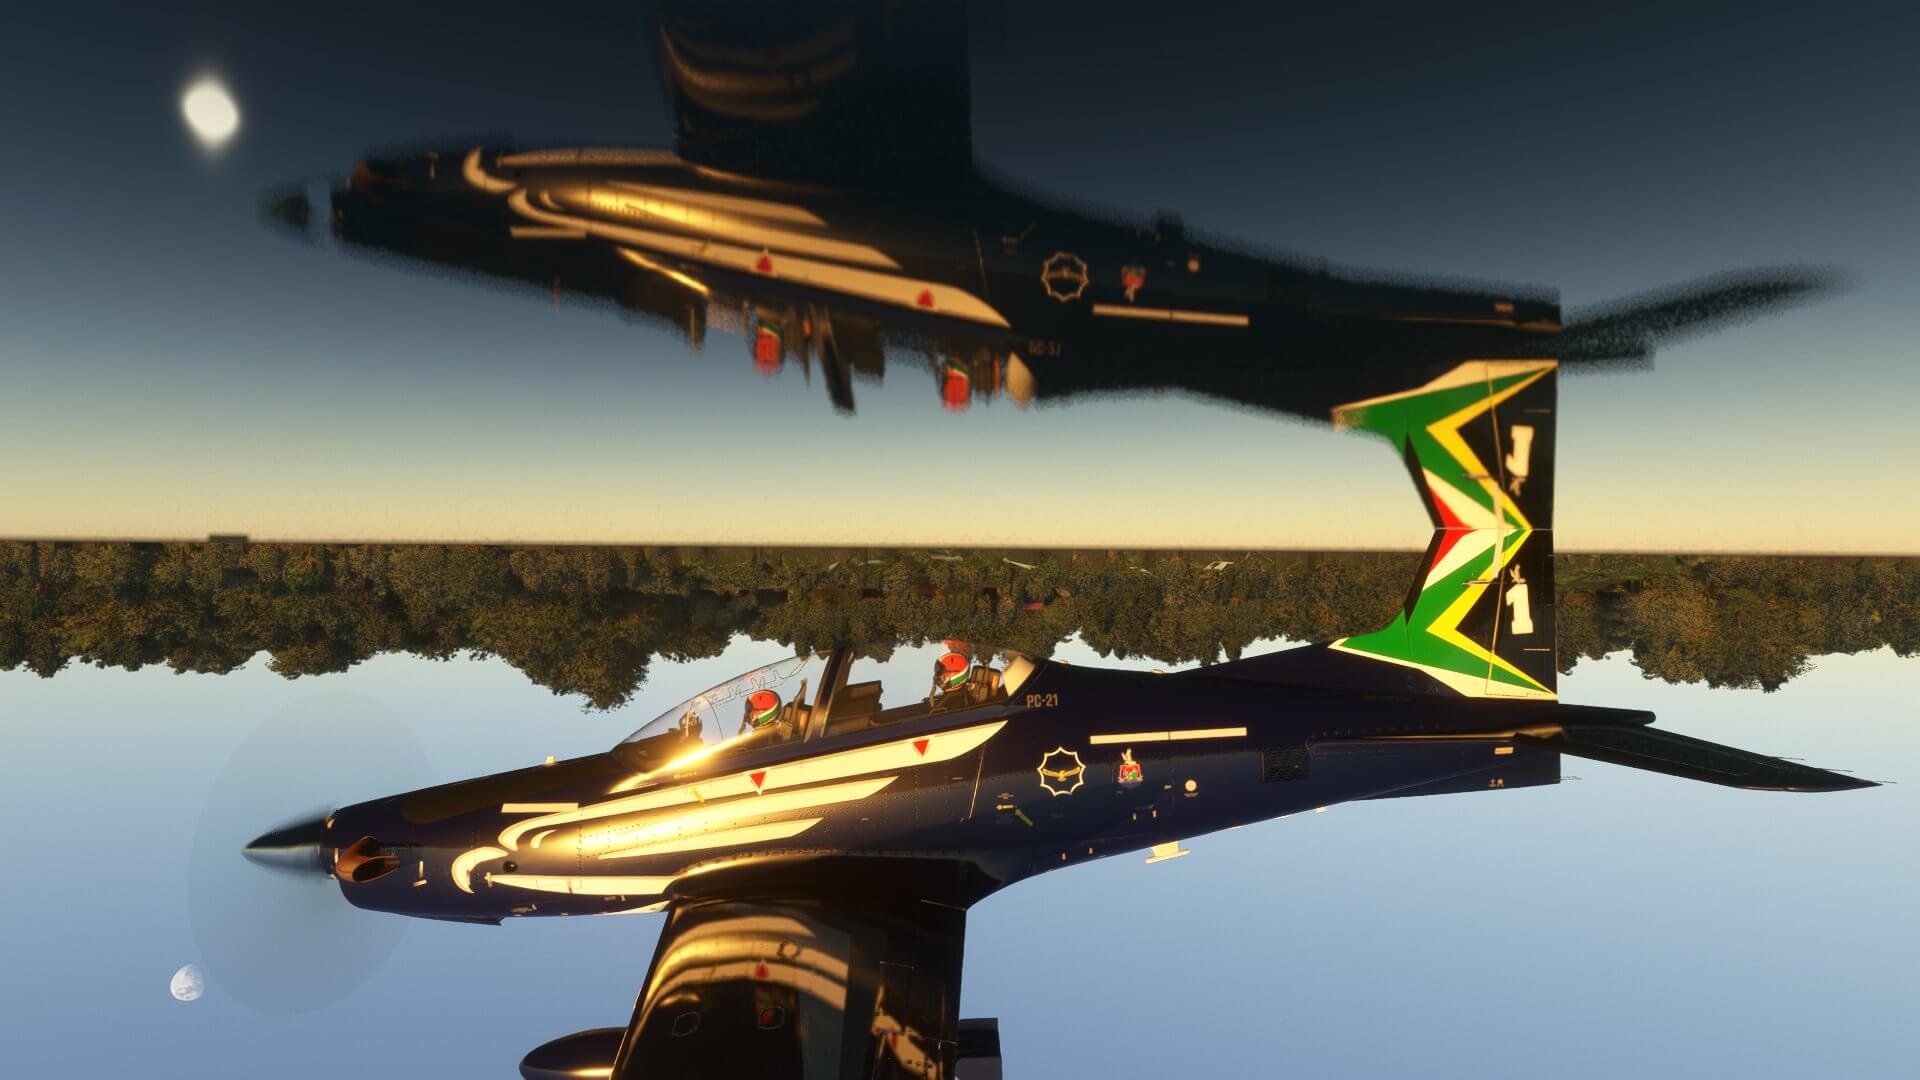 A PC-21 passes very low over still water whilst inverted, casting a perfect shadow on the water.